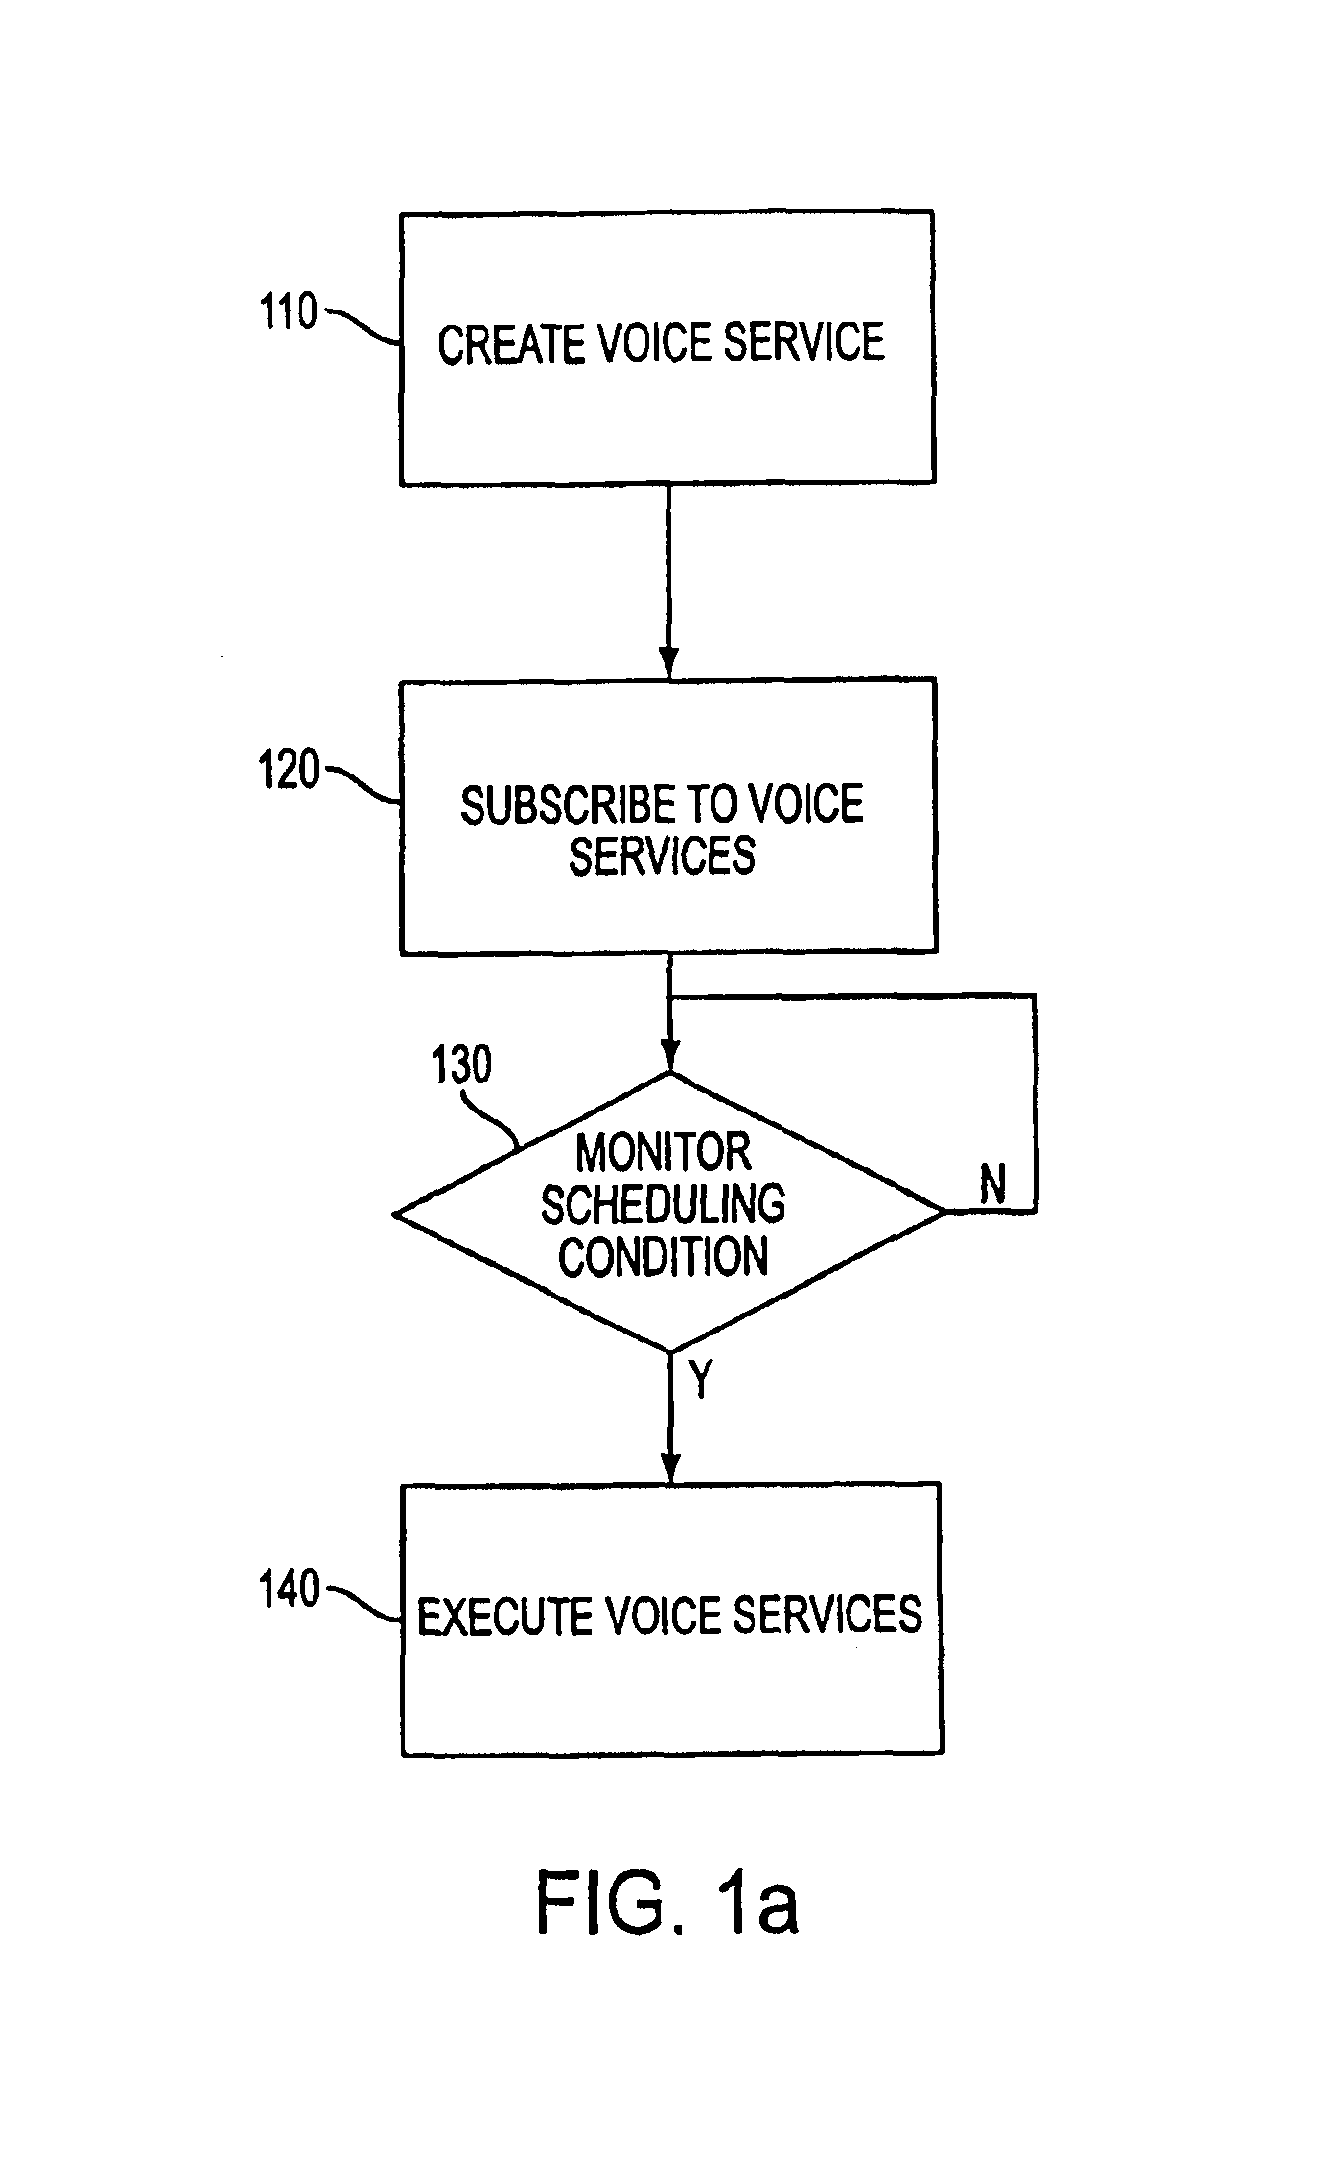 System and method for the creation and automatic deployment of personalized, dynamic and interactive voice services, including deployment through personalized broadcasts